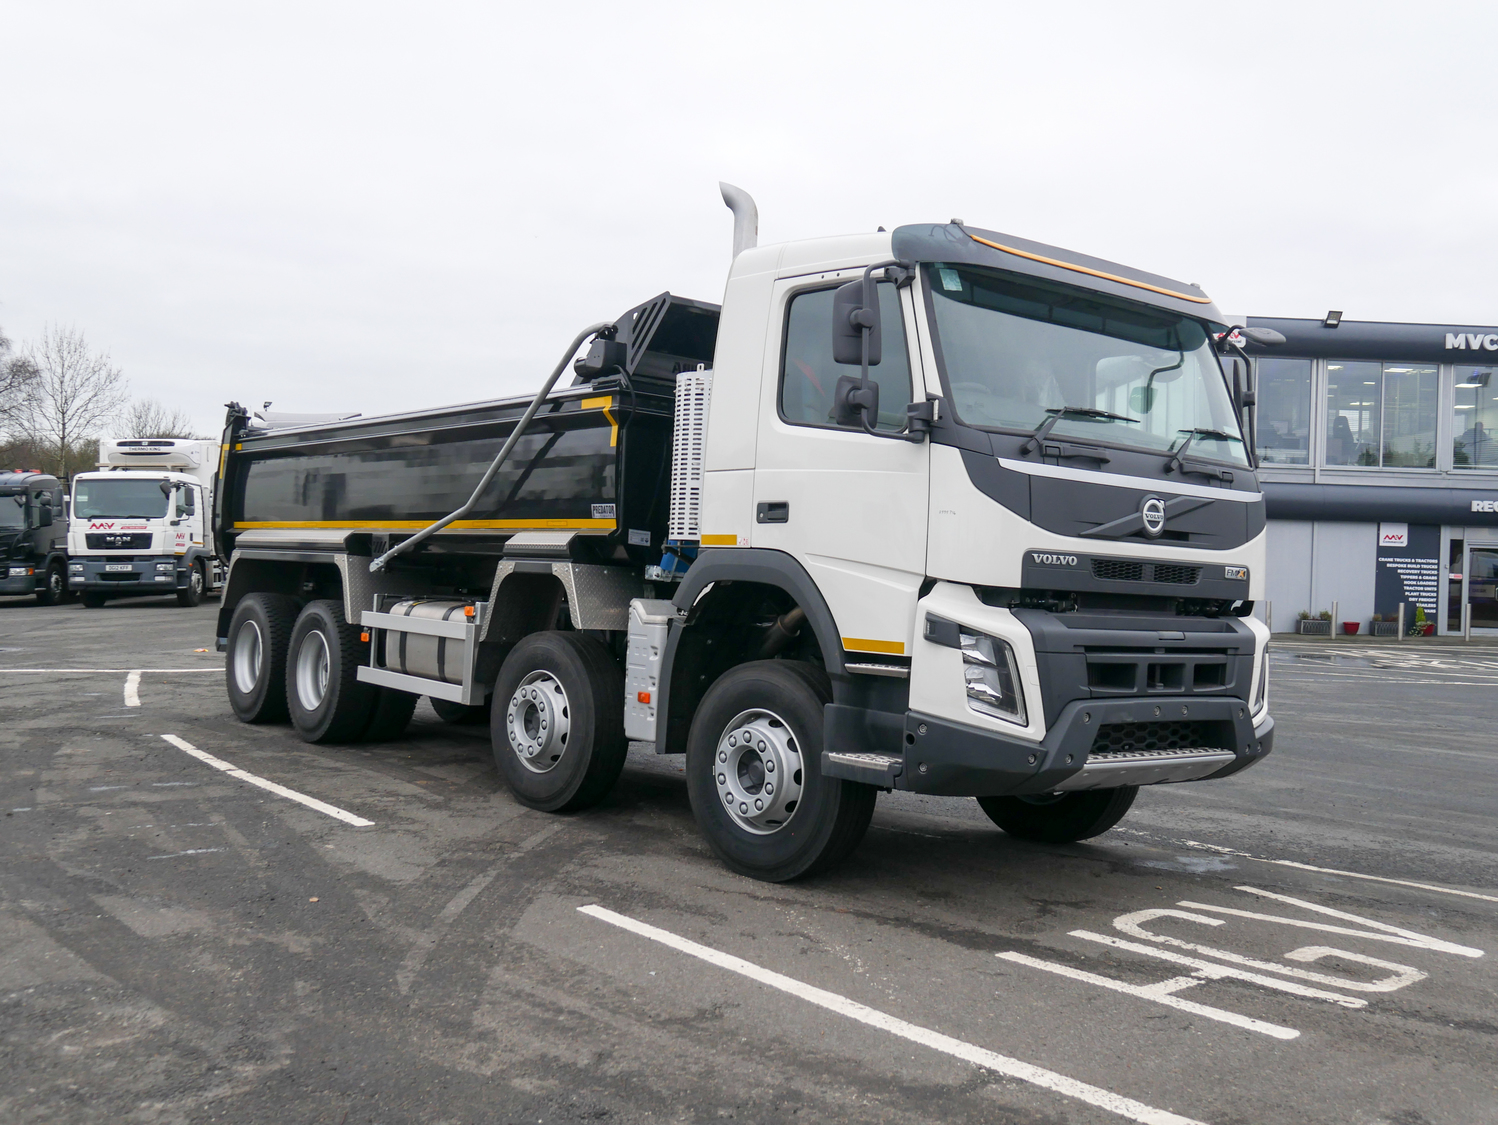 VOLVO FMX 420 Year: 2019 Price: 64 800 EUR New Chassis & Cab Trucks For  Sale - #3399